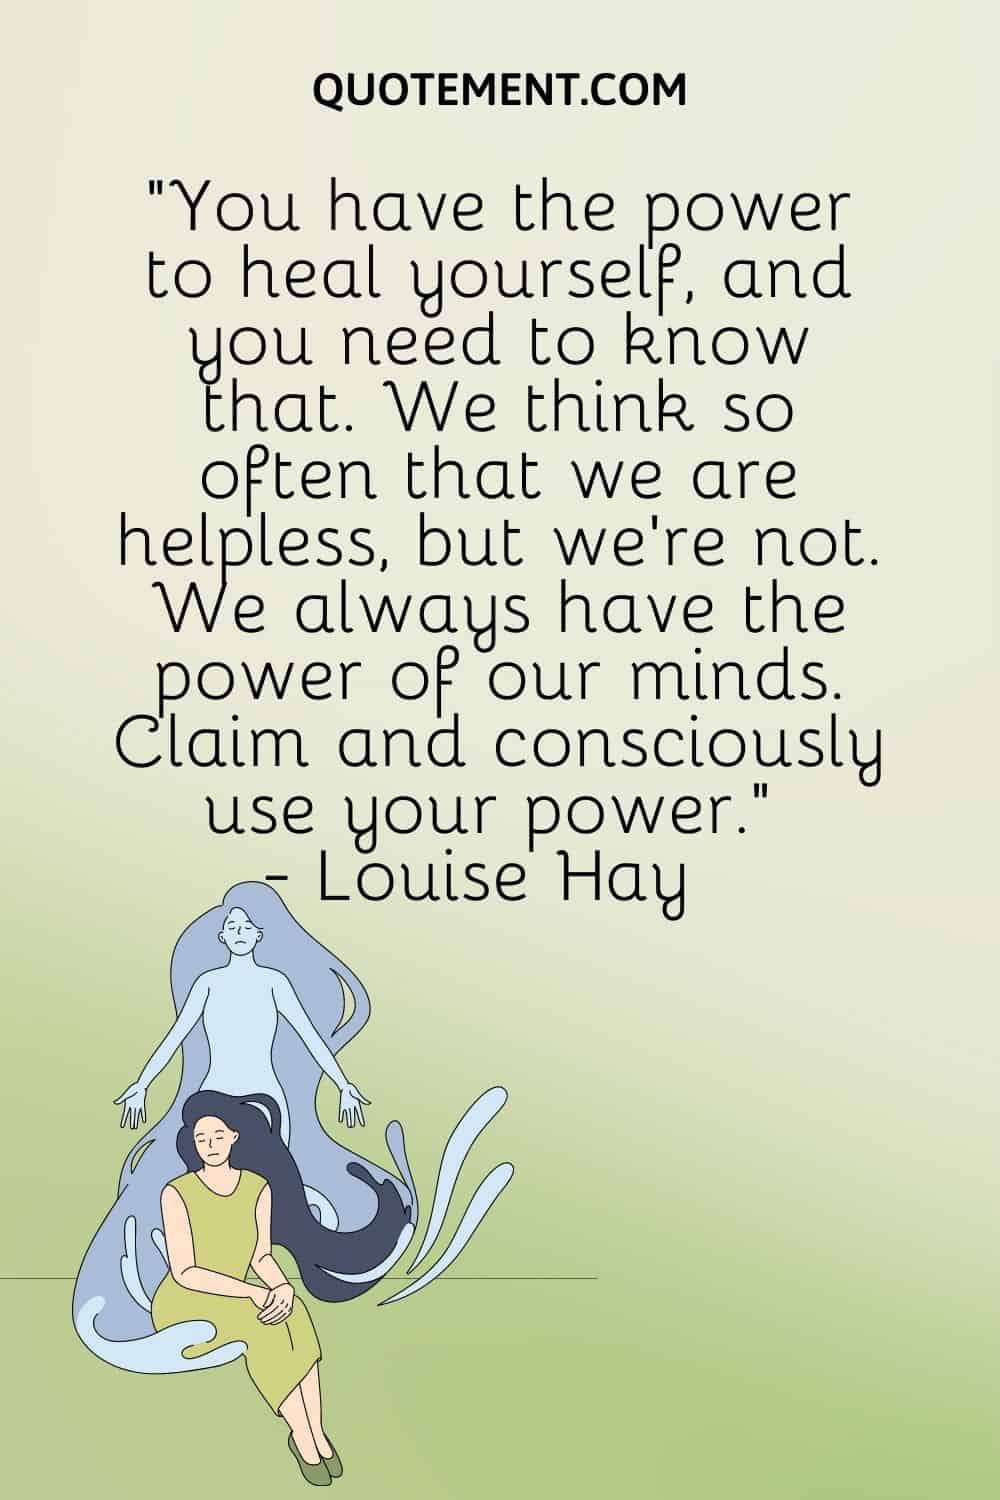 You have the power to heal yourself, and you need to know that